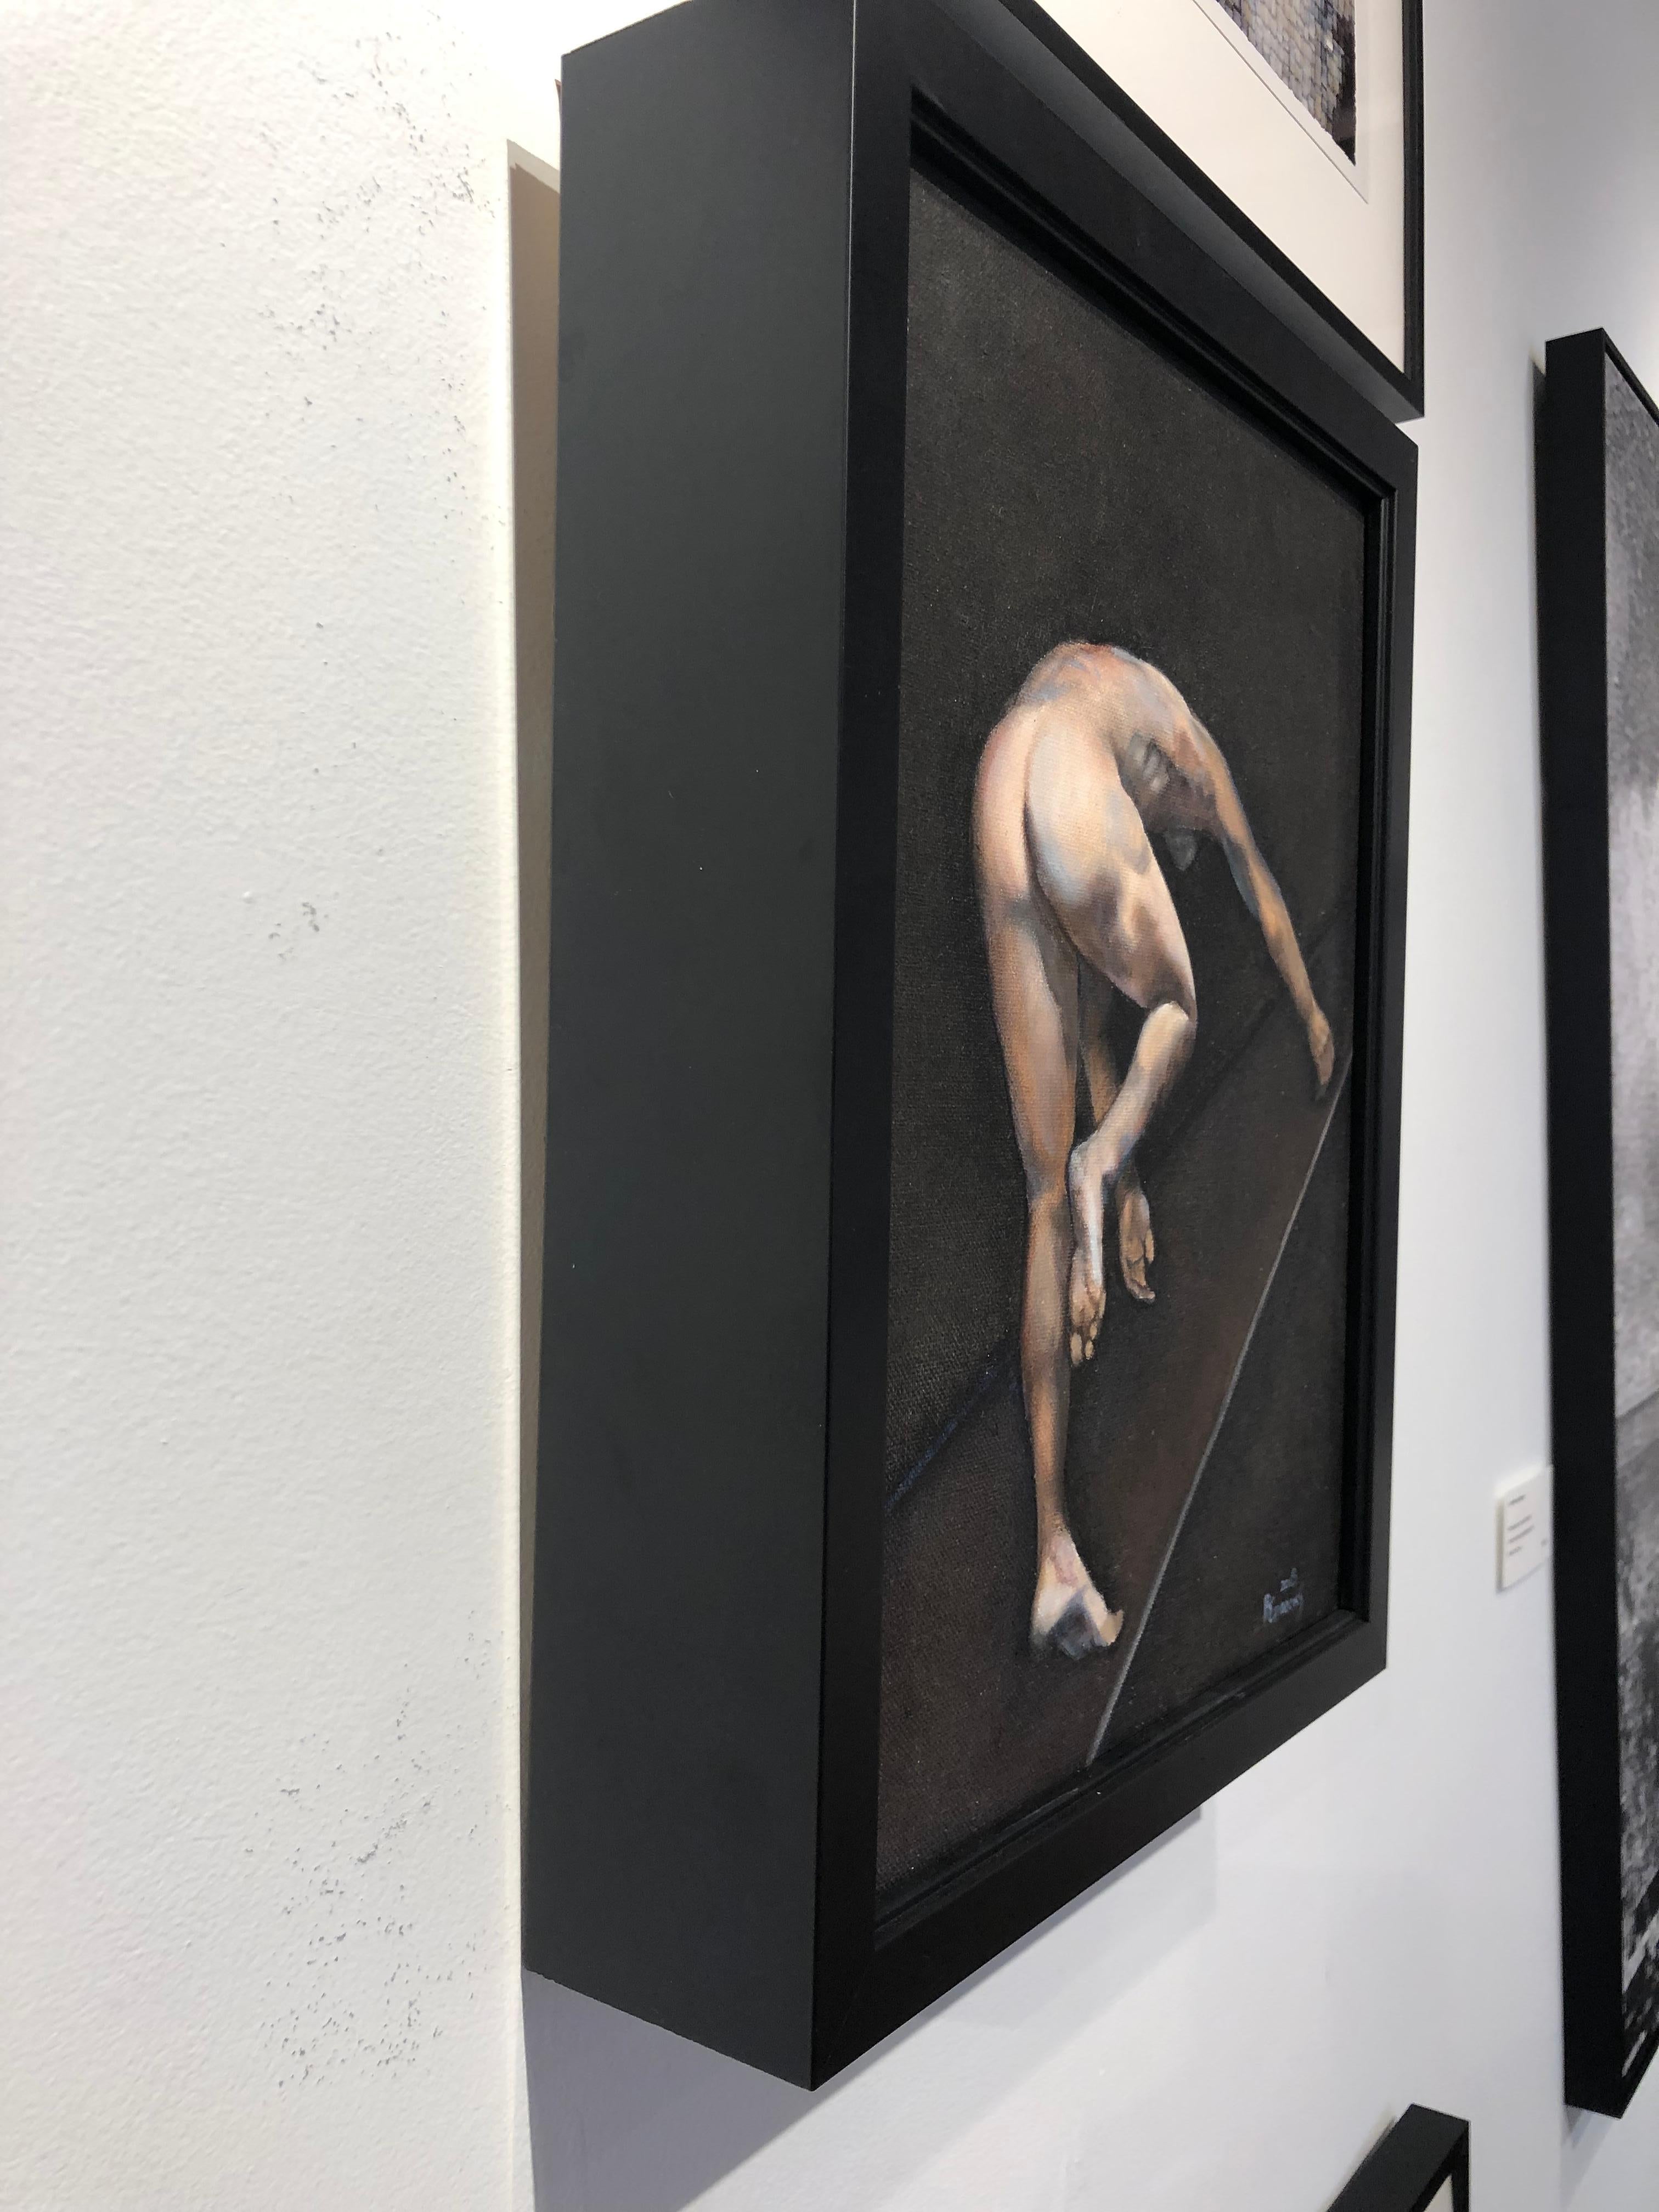 Flight, Male Nude, Posterior View, Climbing, Original Oil Painting, Framed - Black Nude Painting by Richard Gibbons